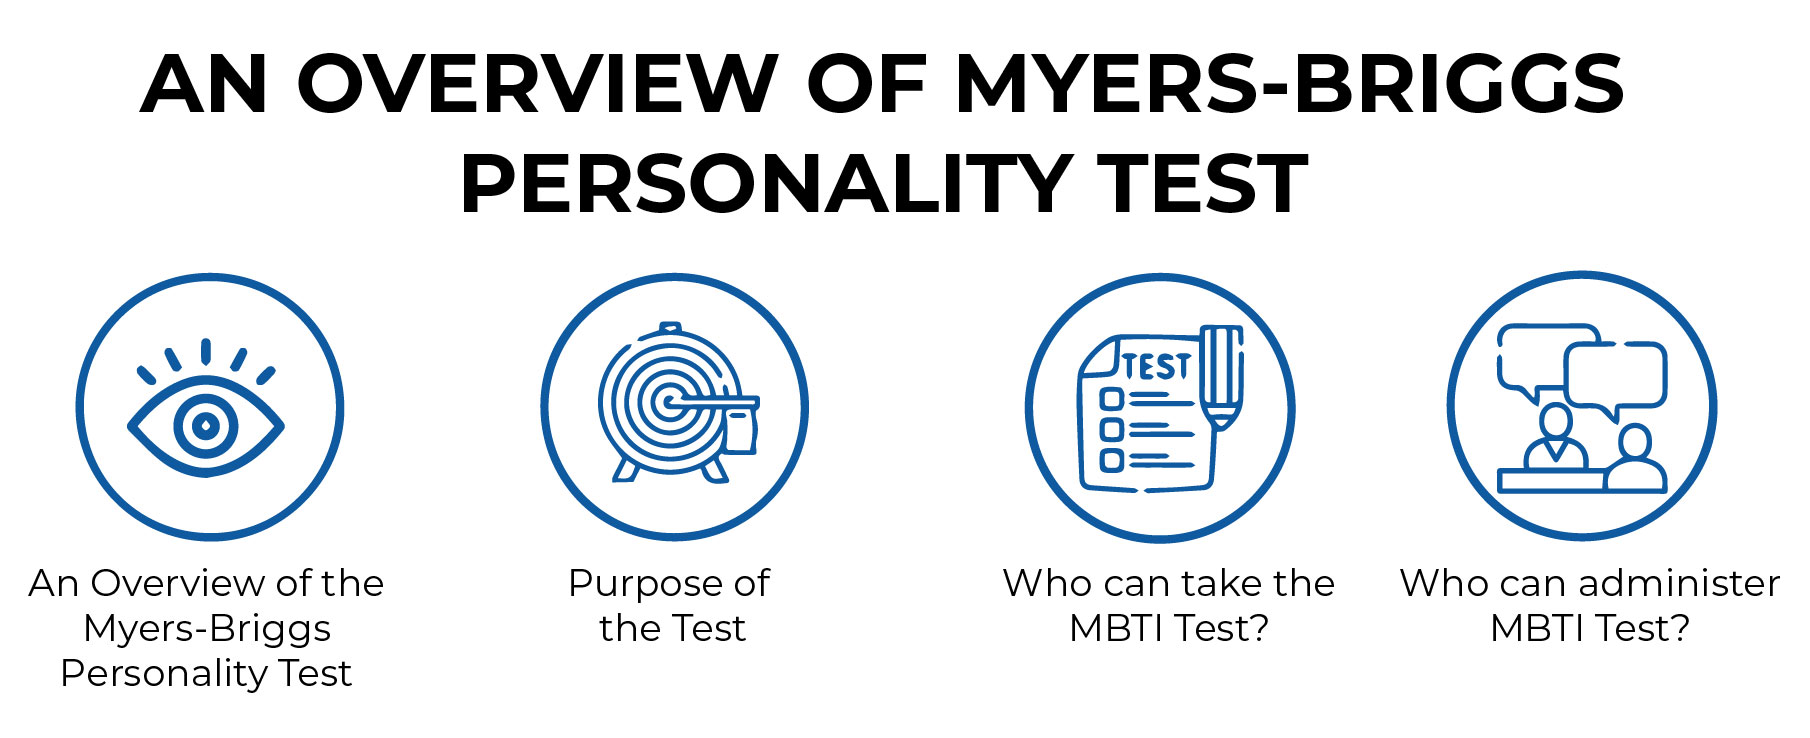 AN OVERVIEW OF MYERS - BRIGGS PERSONALITY TEST